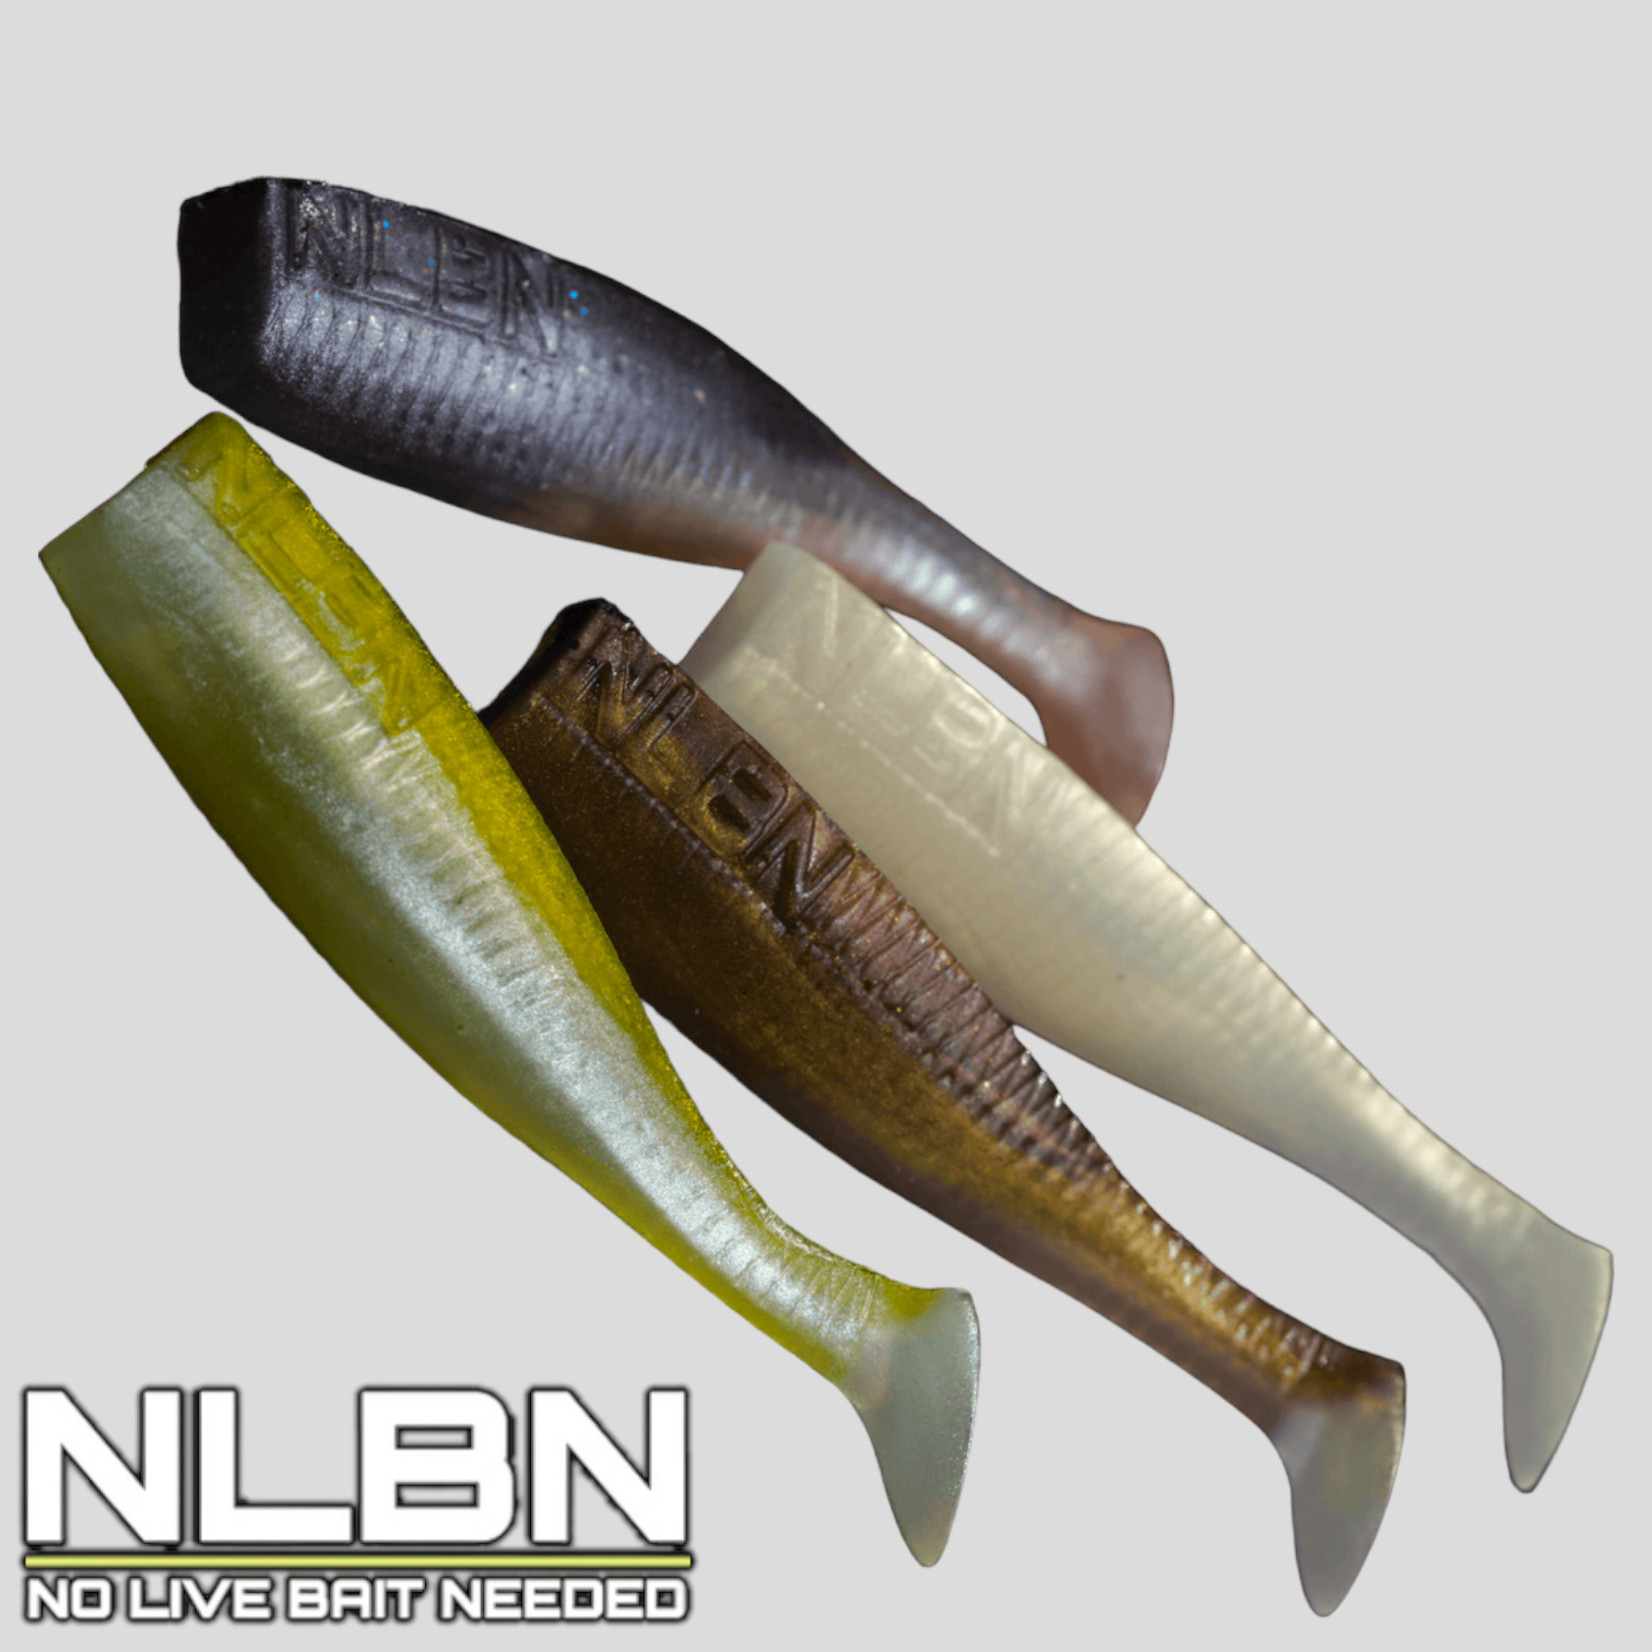 NLBN 3” Paddle Tail! What do you think?⚡️ #nlbn @nolivebaitneeded